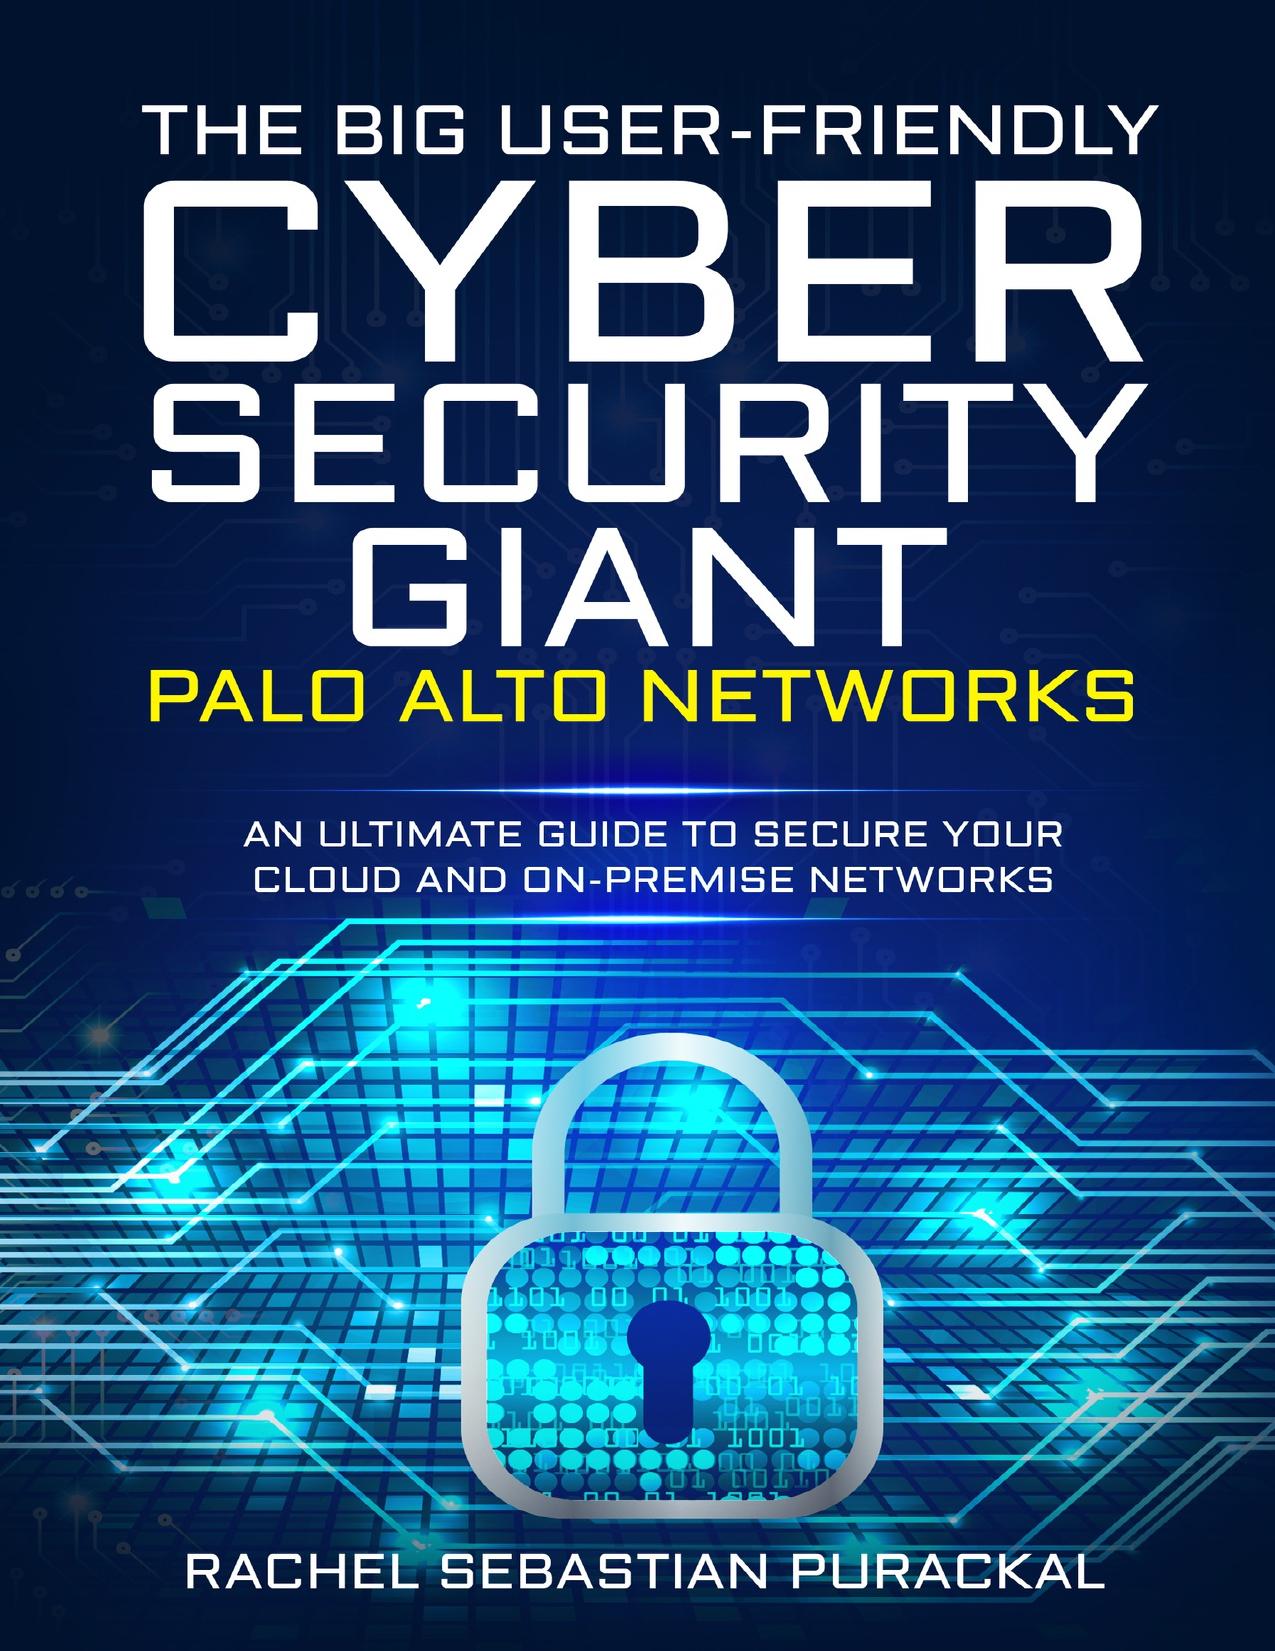 The Big User-Friendly Cyber Security Gaint - Palo Alto Networks: An Ultimate Guide To Secure Your Cloud And On-Premise Networks by Purackal Rachel Sebastian